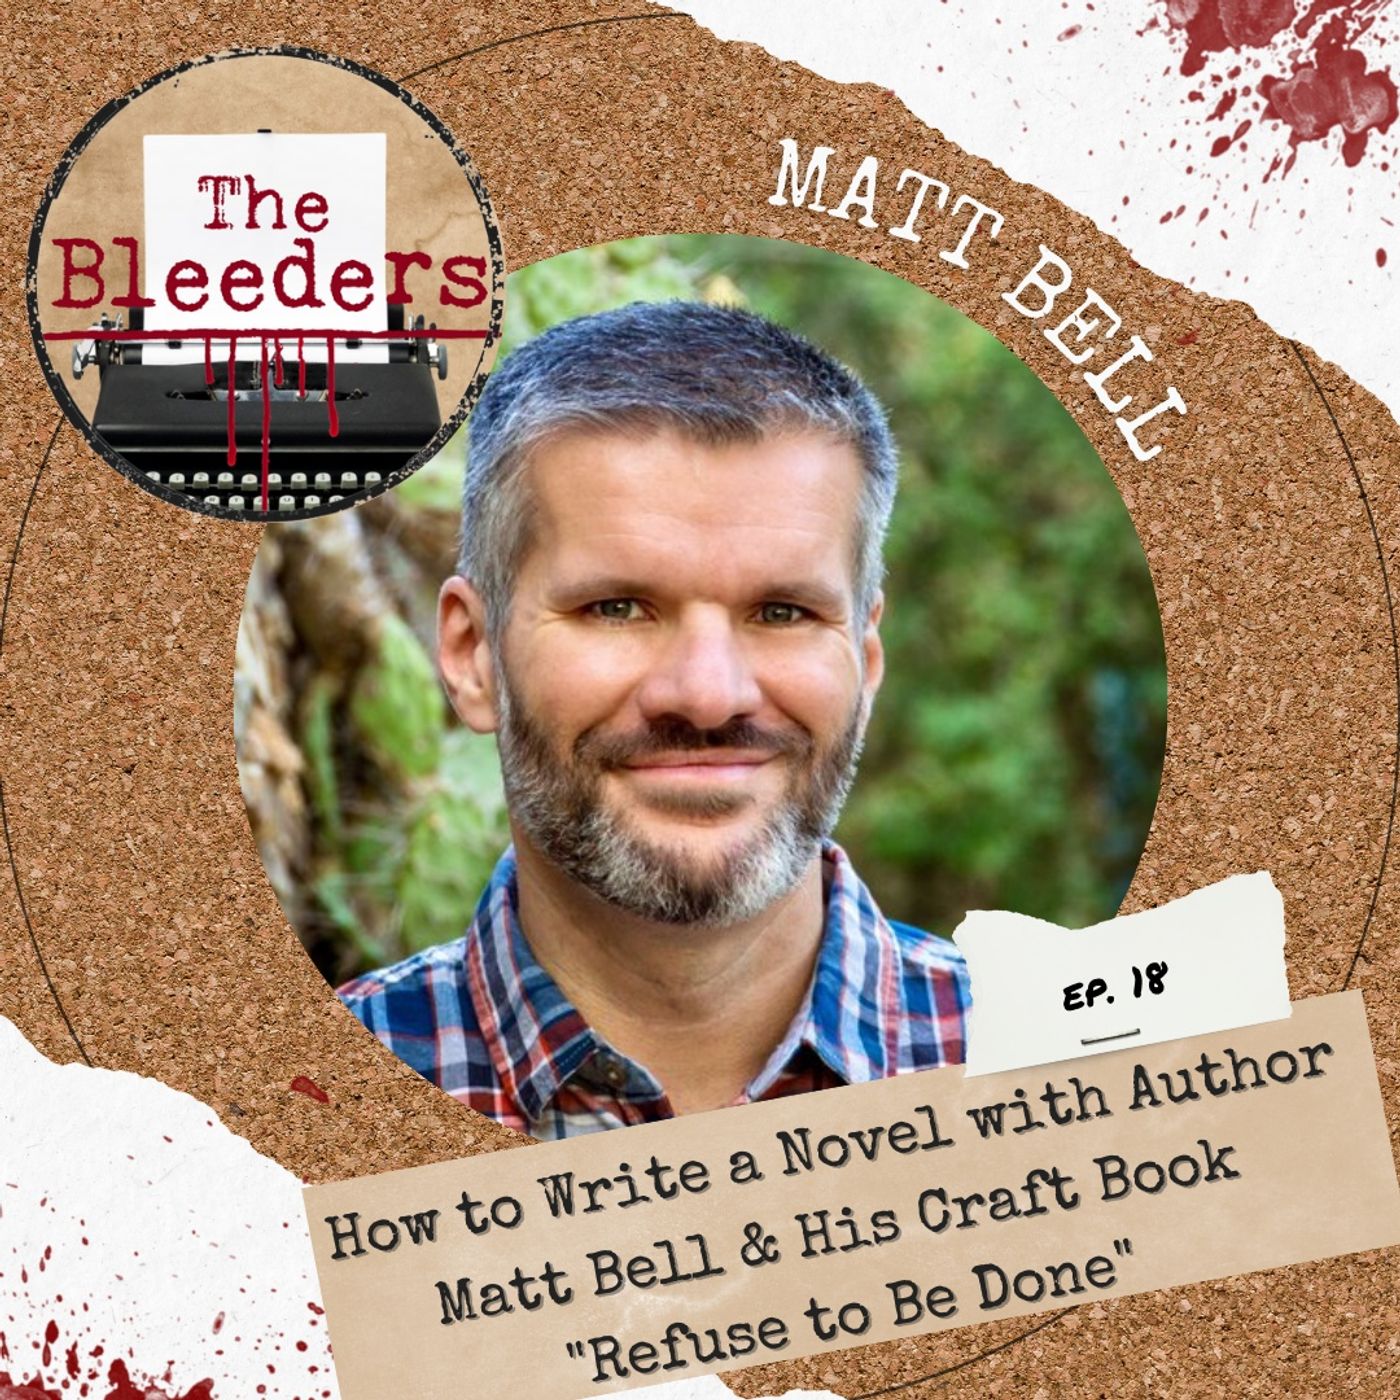 How to Write a Novel with Author Matt Bell & His Craft Book ”Refuse to Be Done”